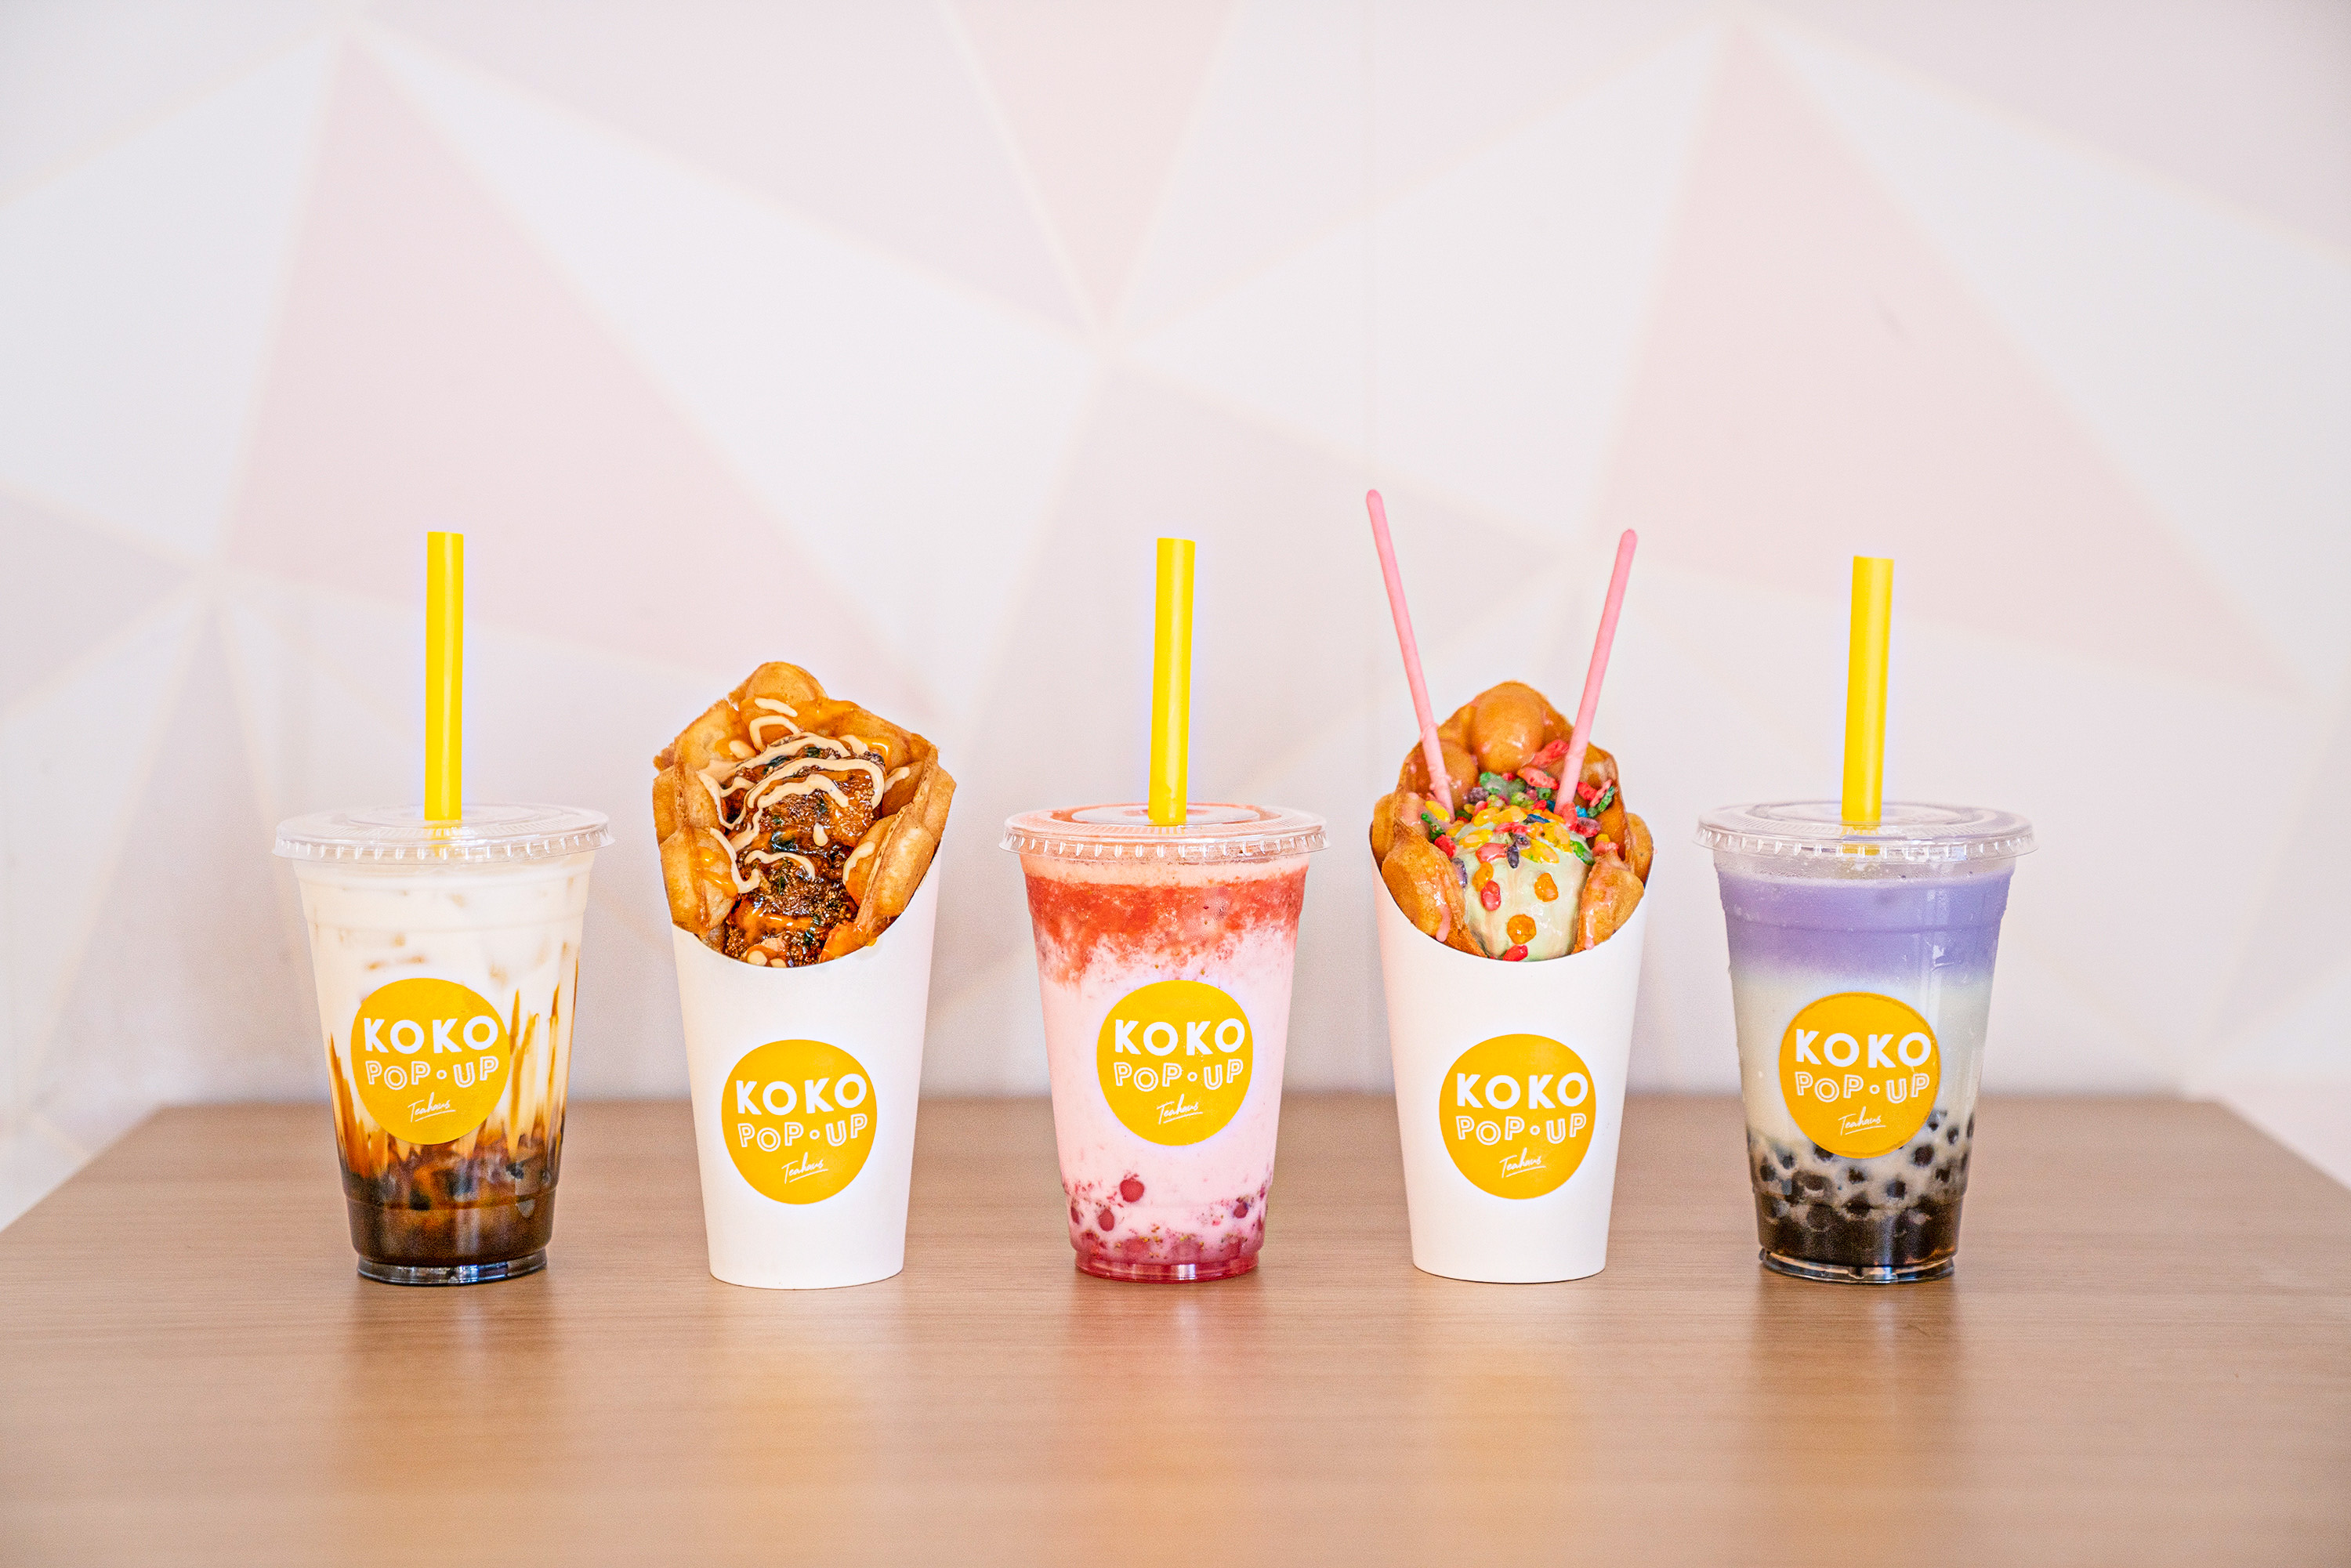 Boba teas and bubble waffles from the Koko Pop-Up